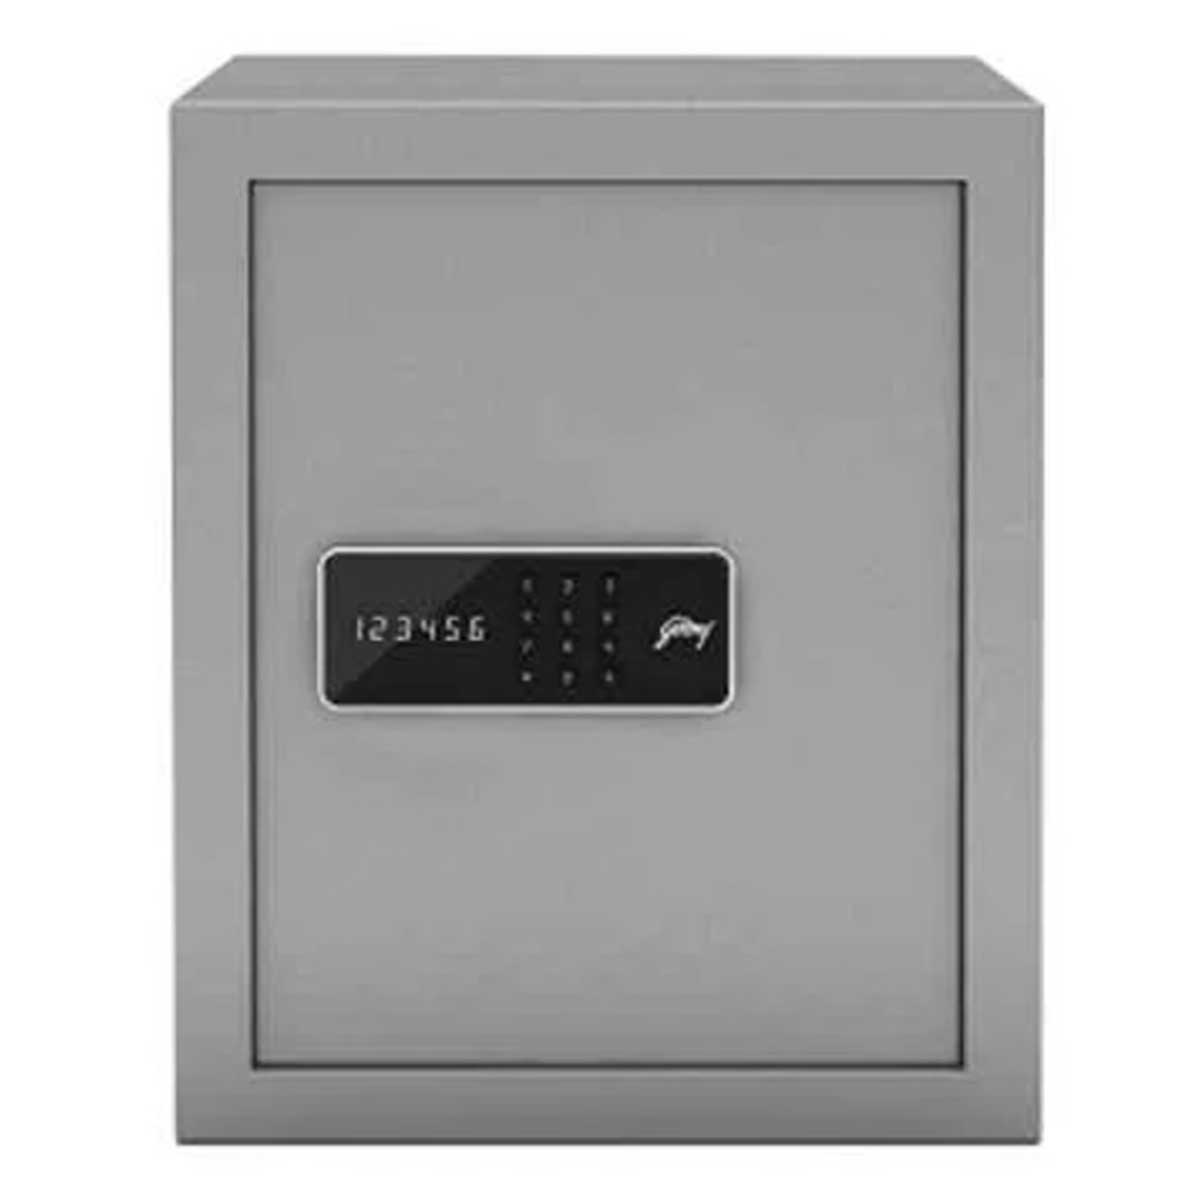 Steel security safe Manufacturers, Suppliers in Imt Manesar